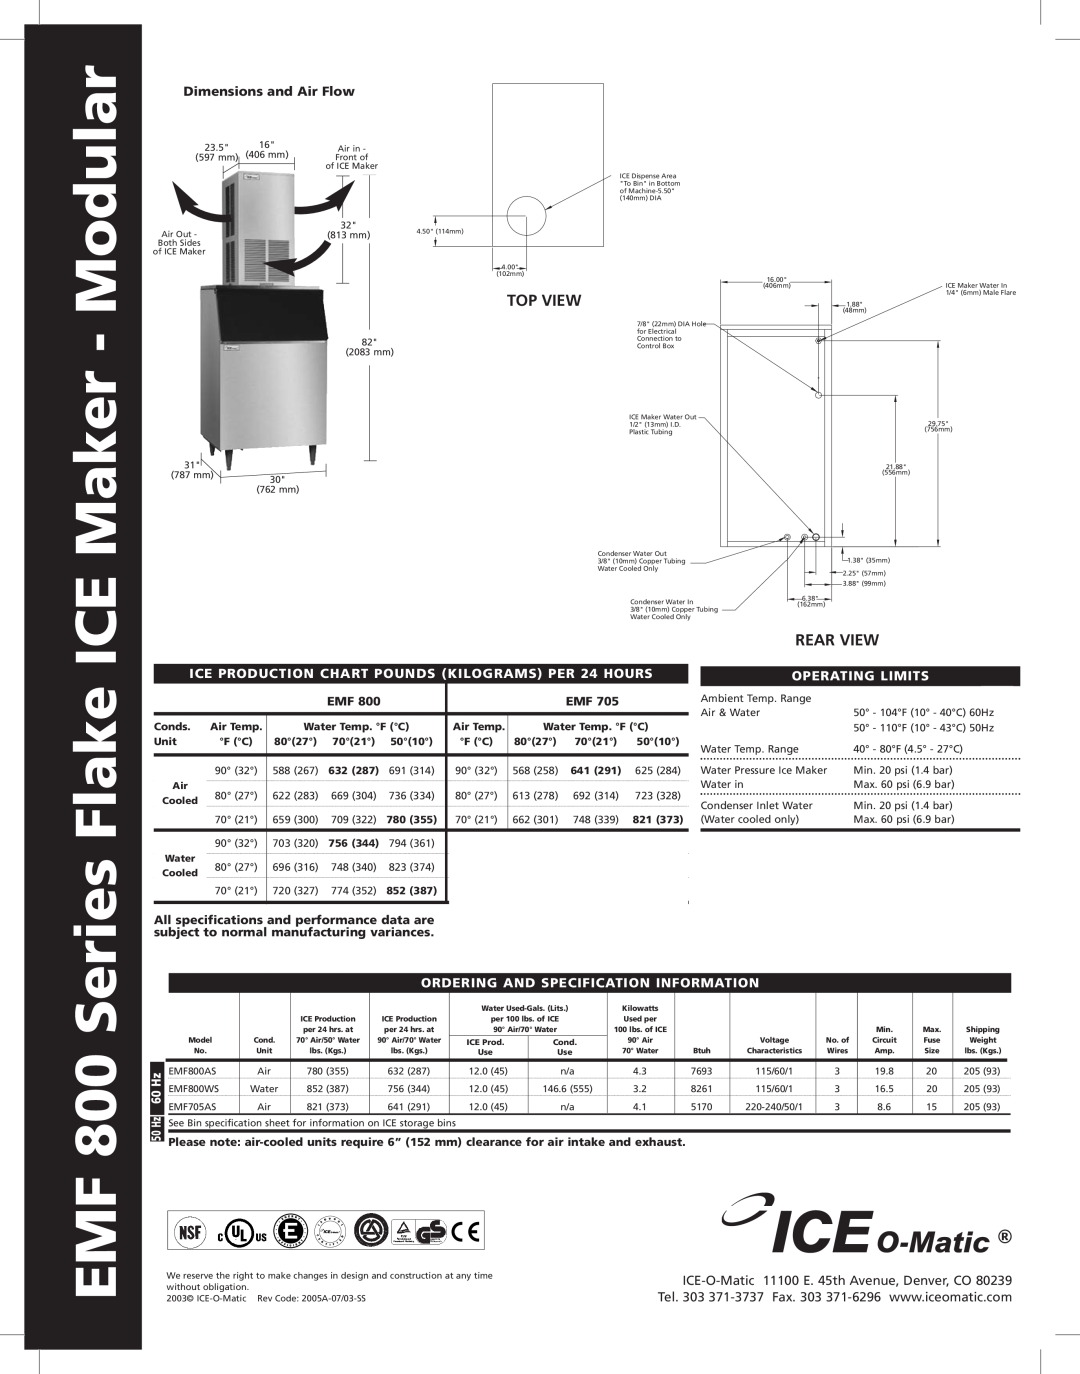 Ice-O-Matic manual Flake ICE Maker - Modular, EMF 800 Series, Top View, Dimensions and Air Flow, Rear View, Information 